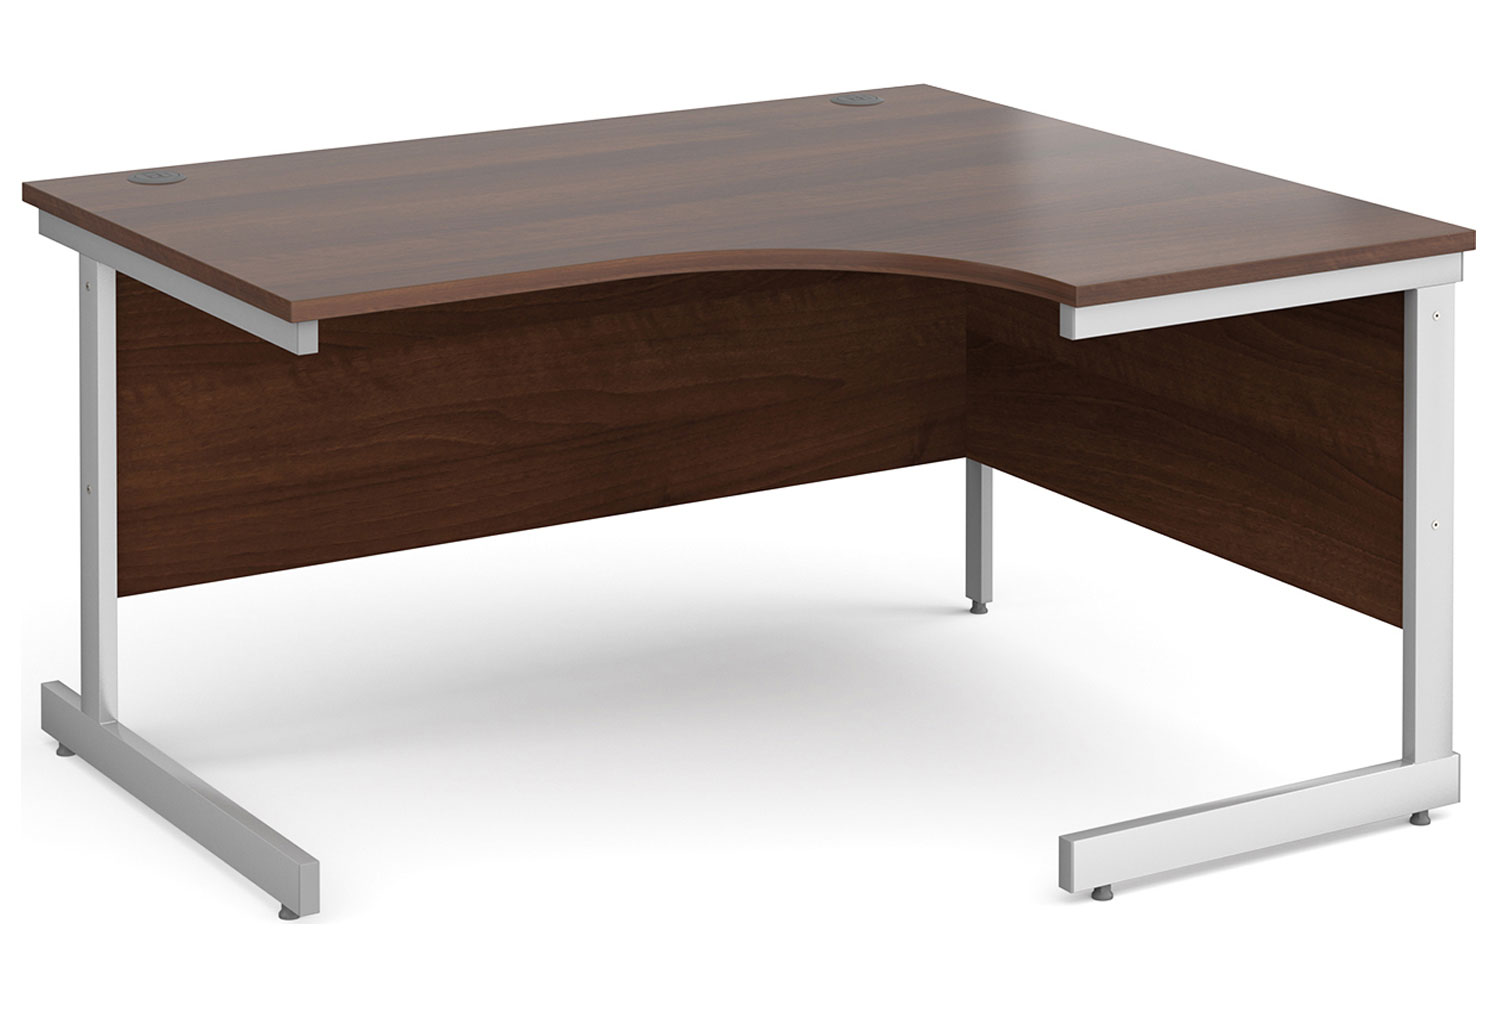 Thrifty Next-Day Right Hand Ergonomic Office Desk Walnut, 140wx120/80dx73h (cm), Express Delivery